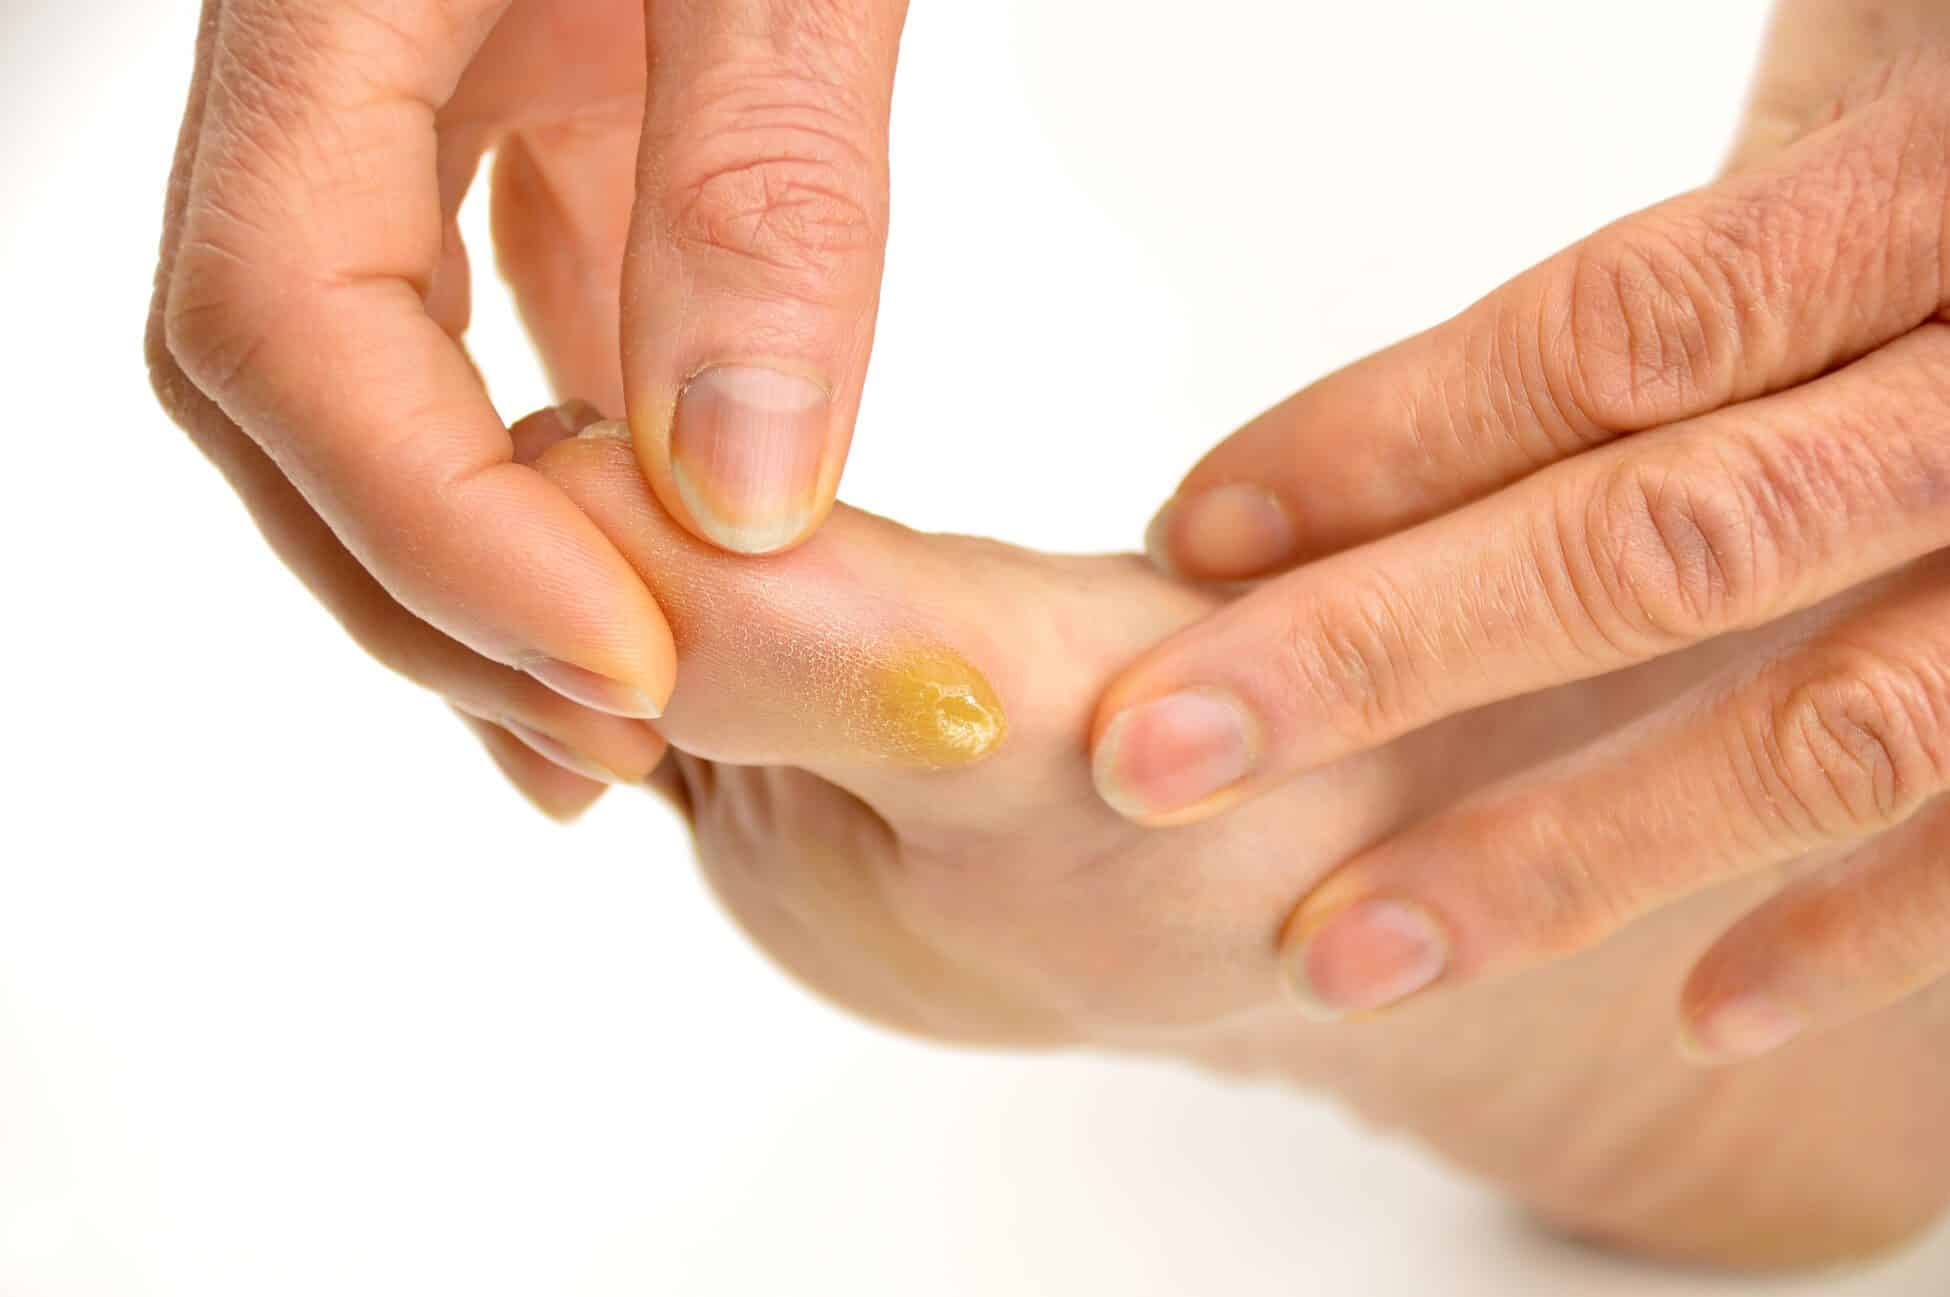 https://feetfirstclinic.com/wp-content/uploads/What-are-corns-and-calluses-prevention-and-treatment-6-scaled-1.jpg